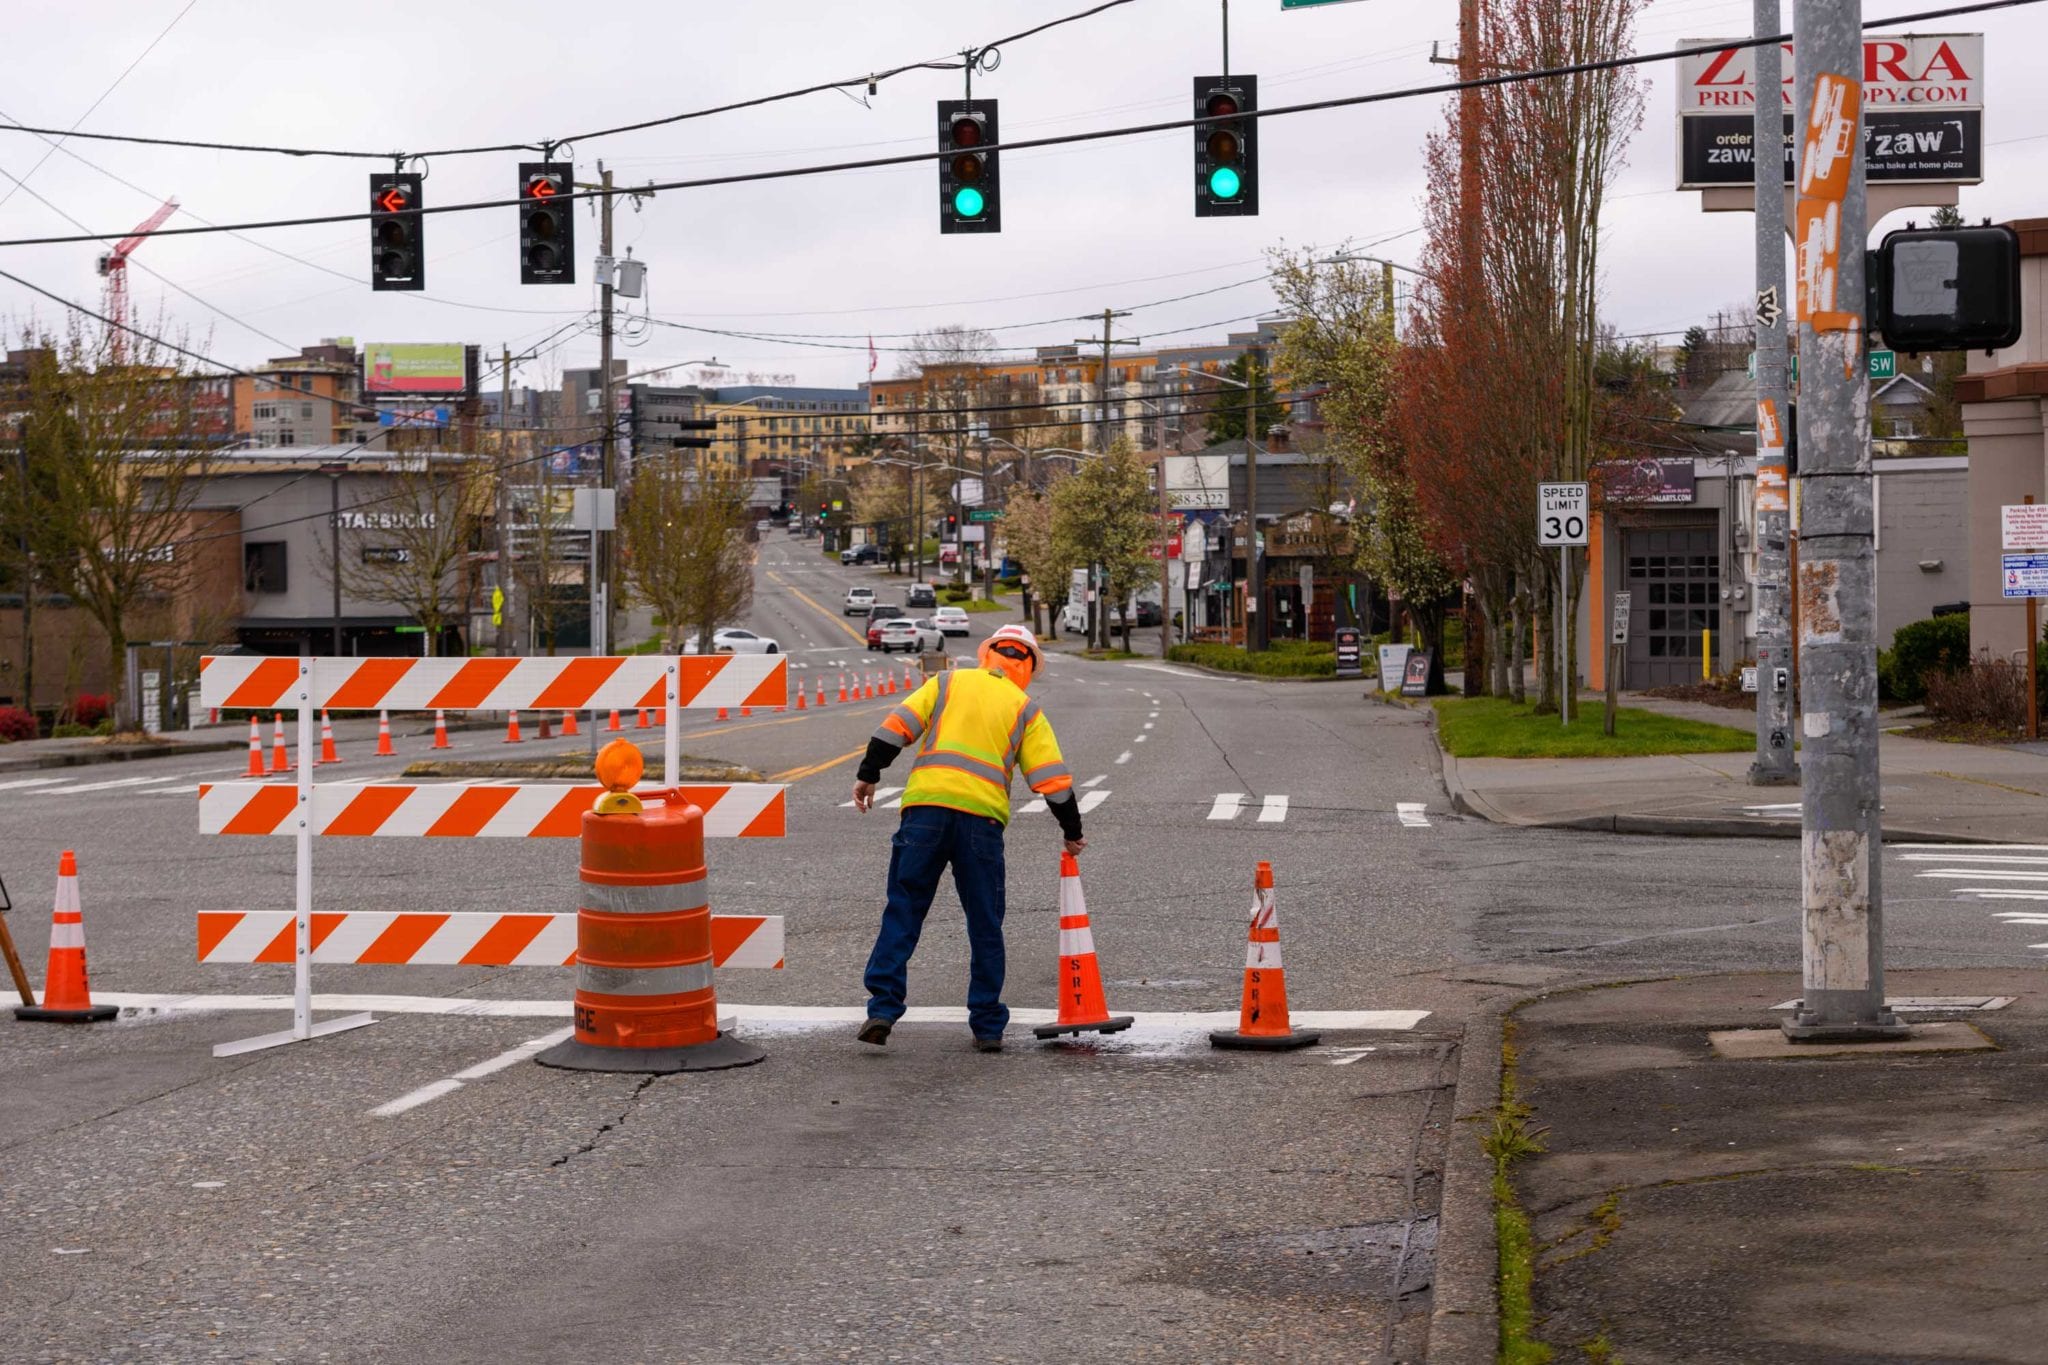 An SDOT crew member placing street closed signs and traffic cones.